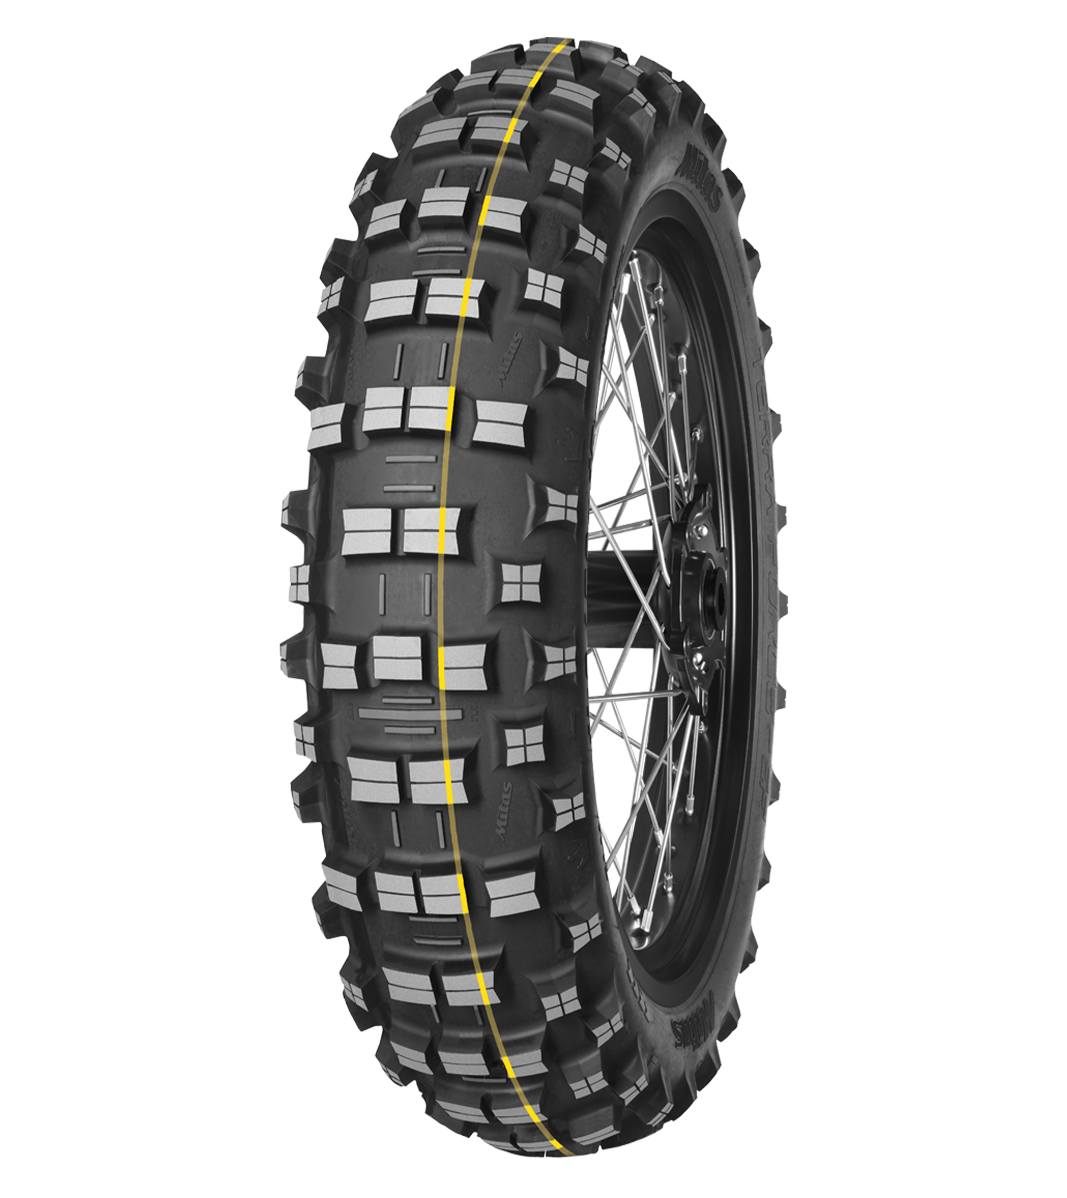 Mitas TERRA FORCE-EF 140/80-18 Enduro Competition Off-Road SUPER 70R Yellow Tube Rear Tire, 226283, 140/80-18, Enduro Competition, Off-Road, Rear, Terra Force, Terra Force-EF, Trail, Tires - Imported and distributed in North & South America by Lindeco Genuine Powersports - Premier Powersports Equipment and Accessories for Motorcycle Enthusiasts, Professional Riders and Dealers.